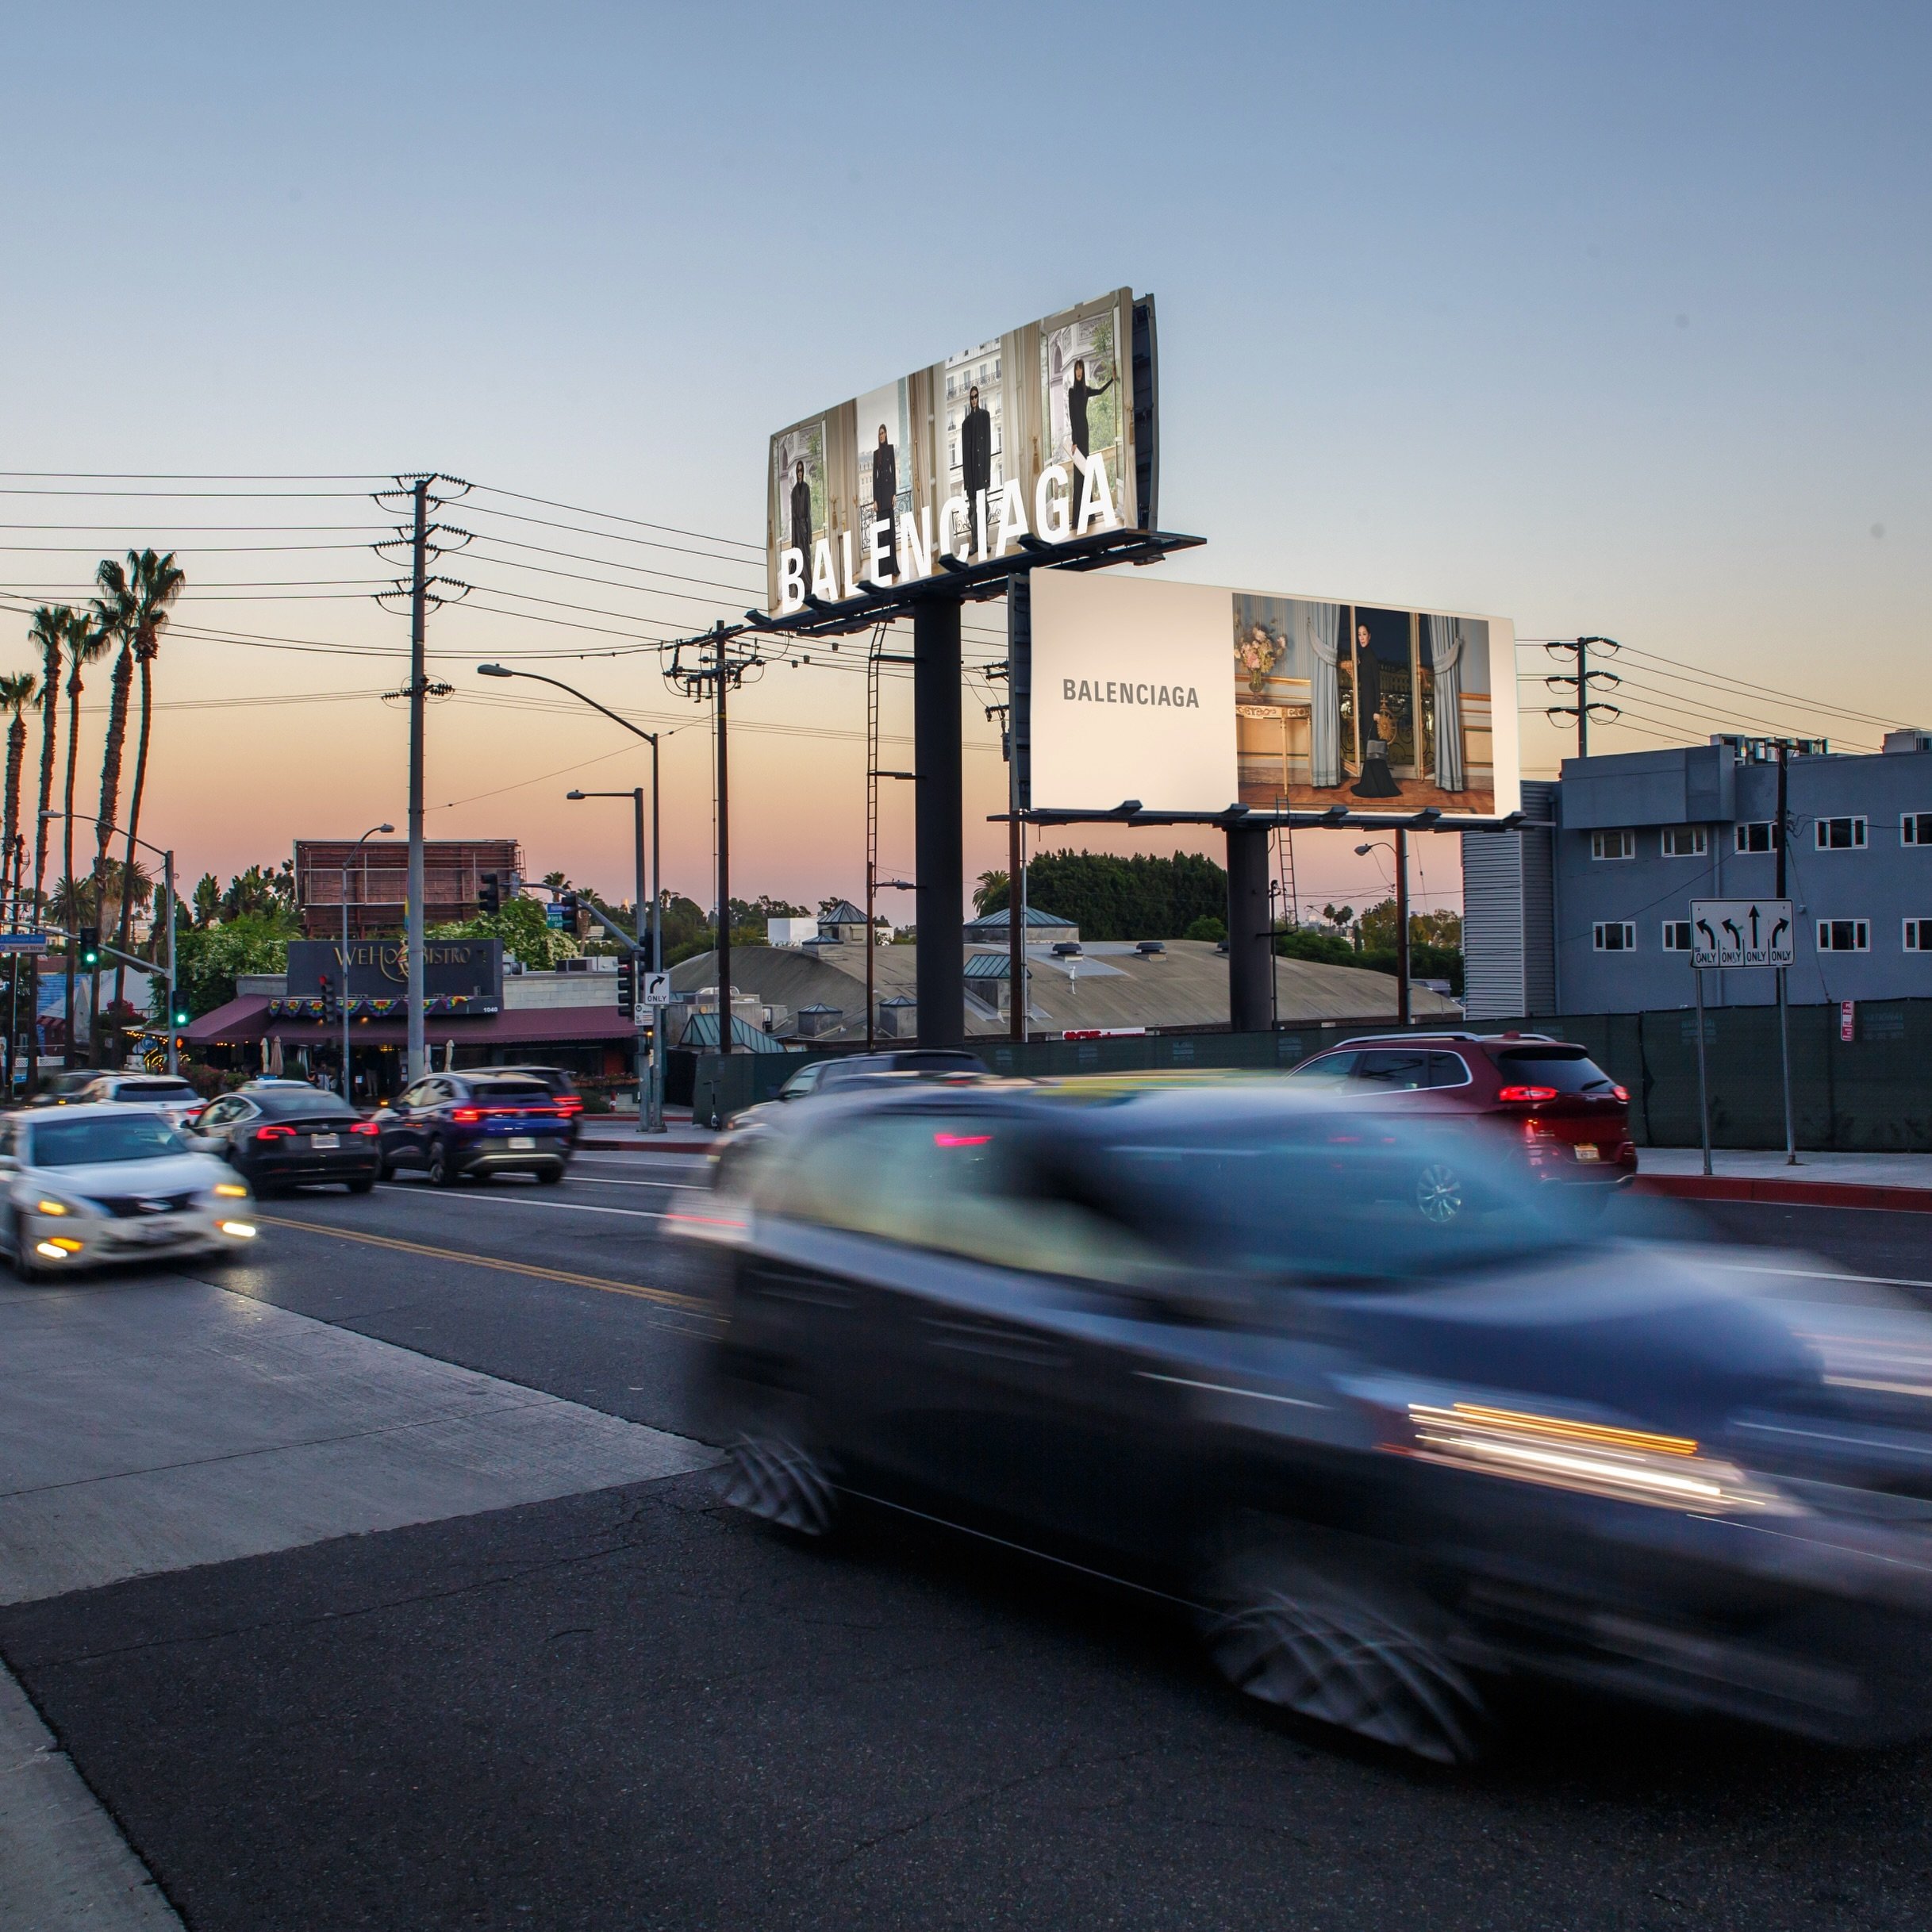 WEHO Quartet is powerhouse media destination, towering above traffic on La Cienega Blvd near Santa Monica Blvd. The multidirectional displays face four directions across two elevations, giving brands the rare opportunity to deliver their message to t